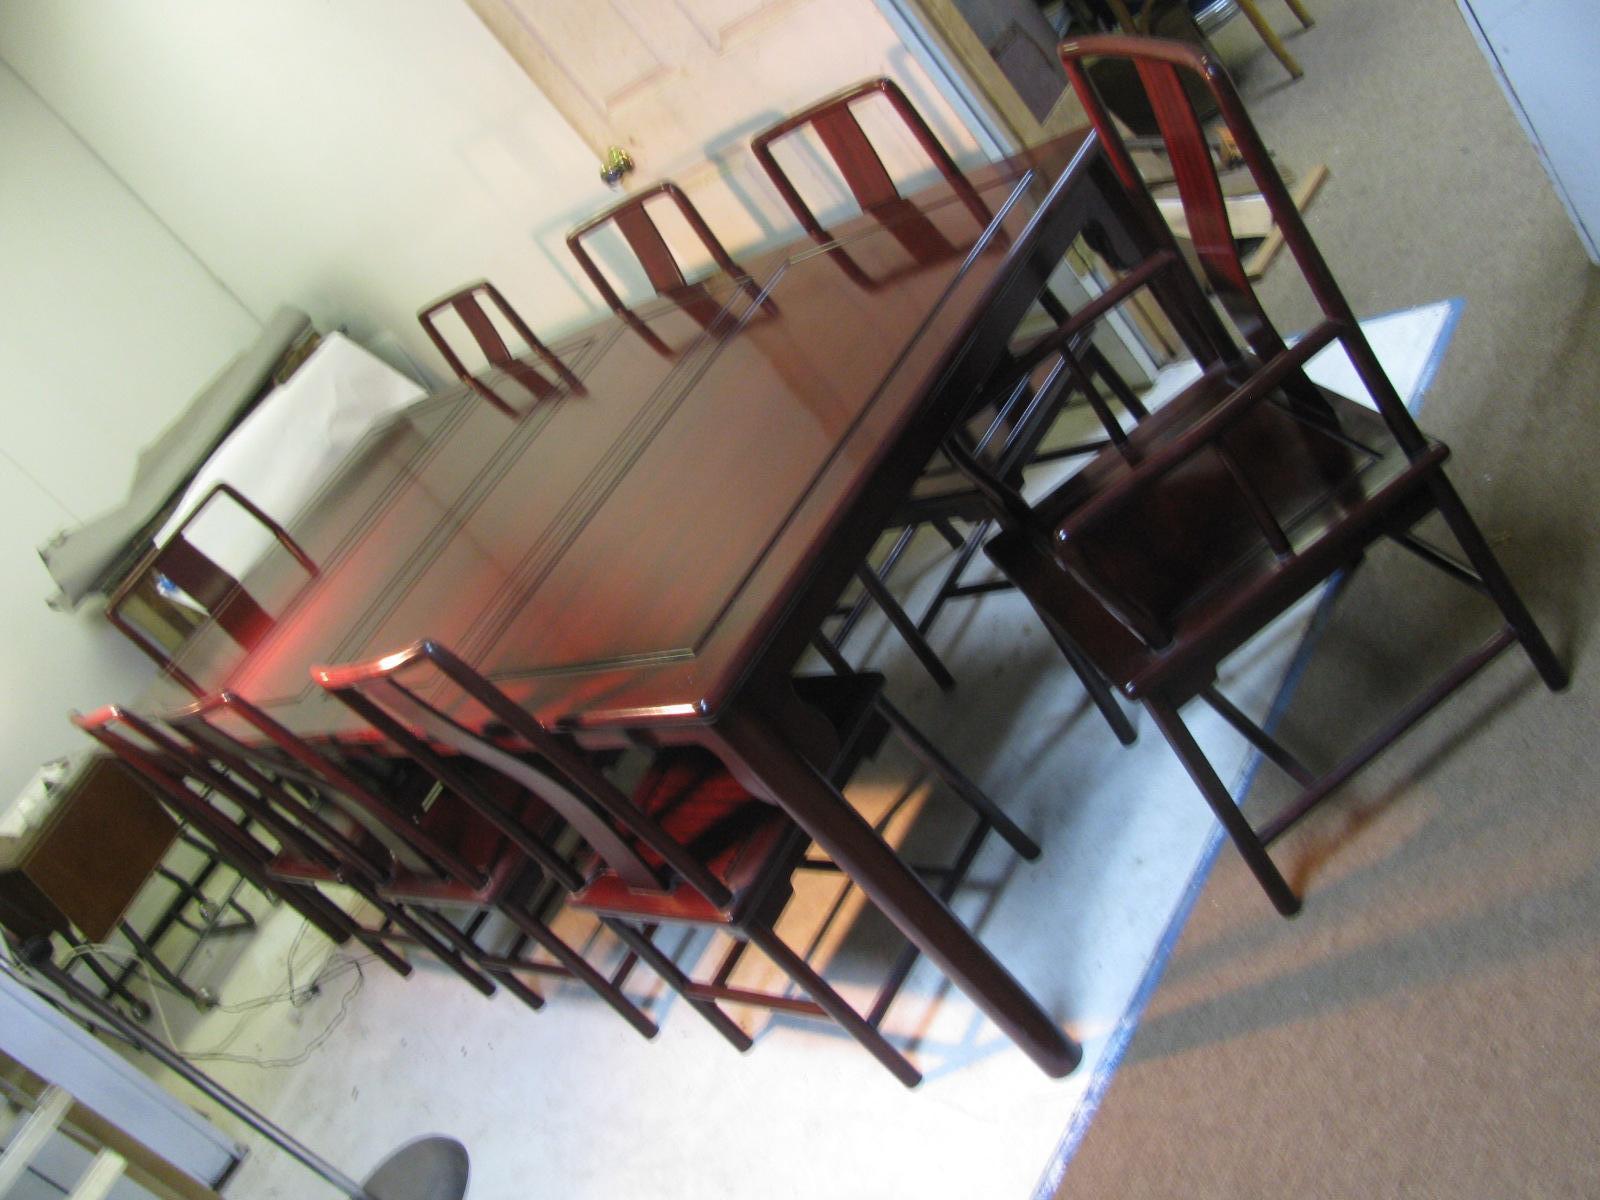 Fabulous Chinese rosewood dining room table with 8 chairs. An exceptional set which includes a table with 2 leaves, and eight chairs, (6 side chairs and 2 arm chairs. All created out of solid rosewood in the Ming style. Set is in very good condition